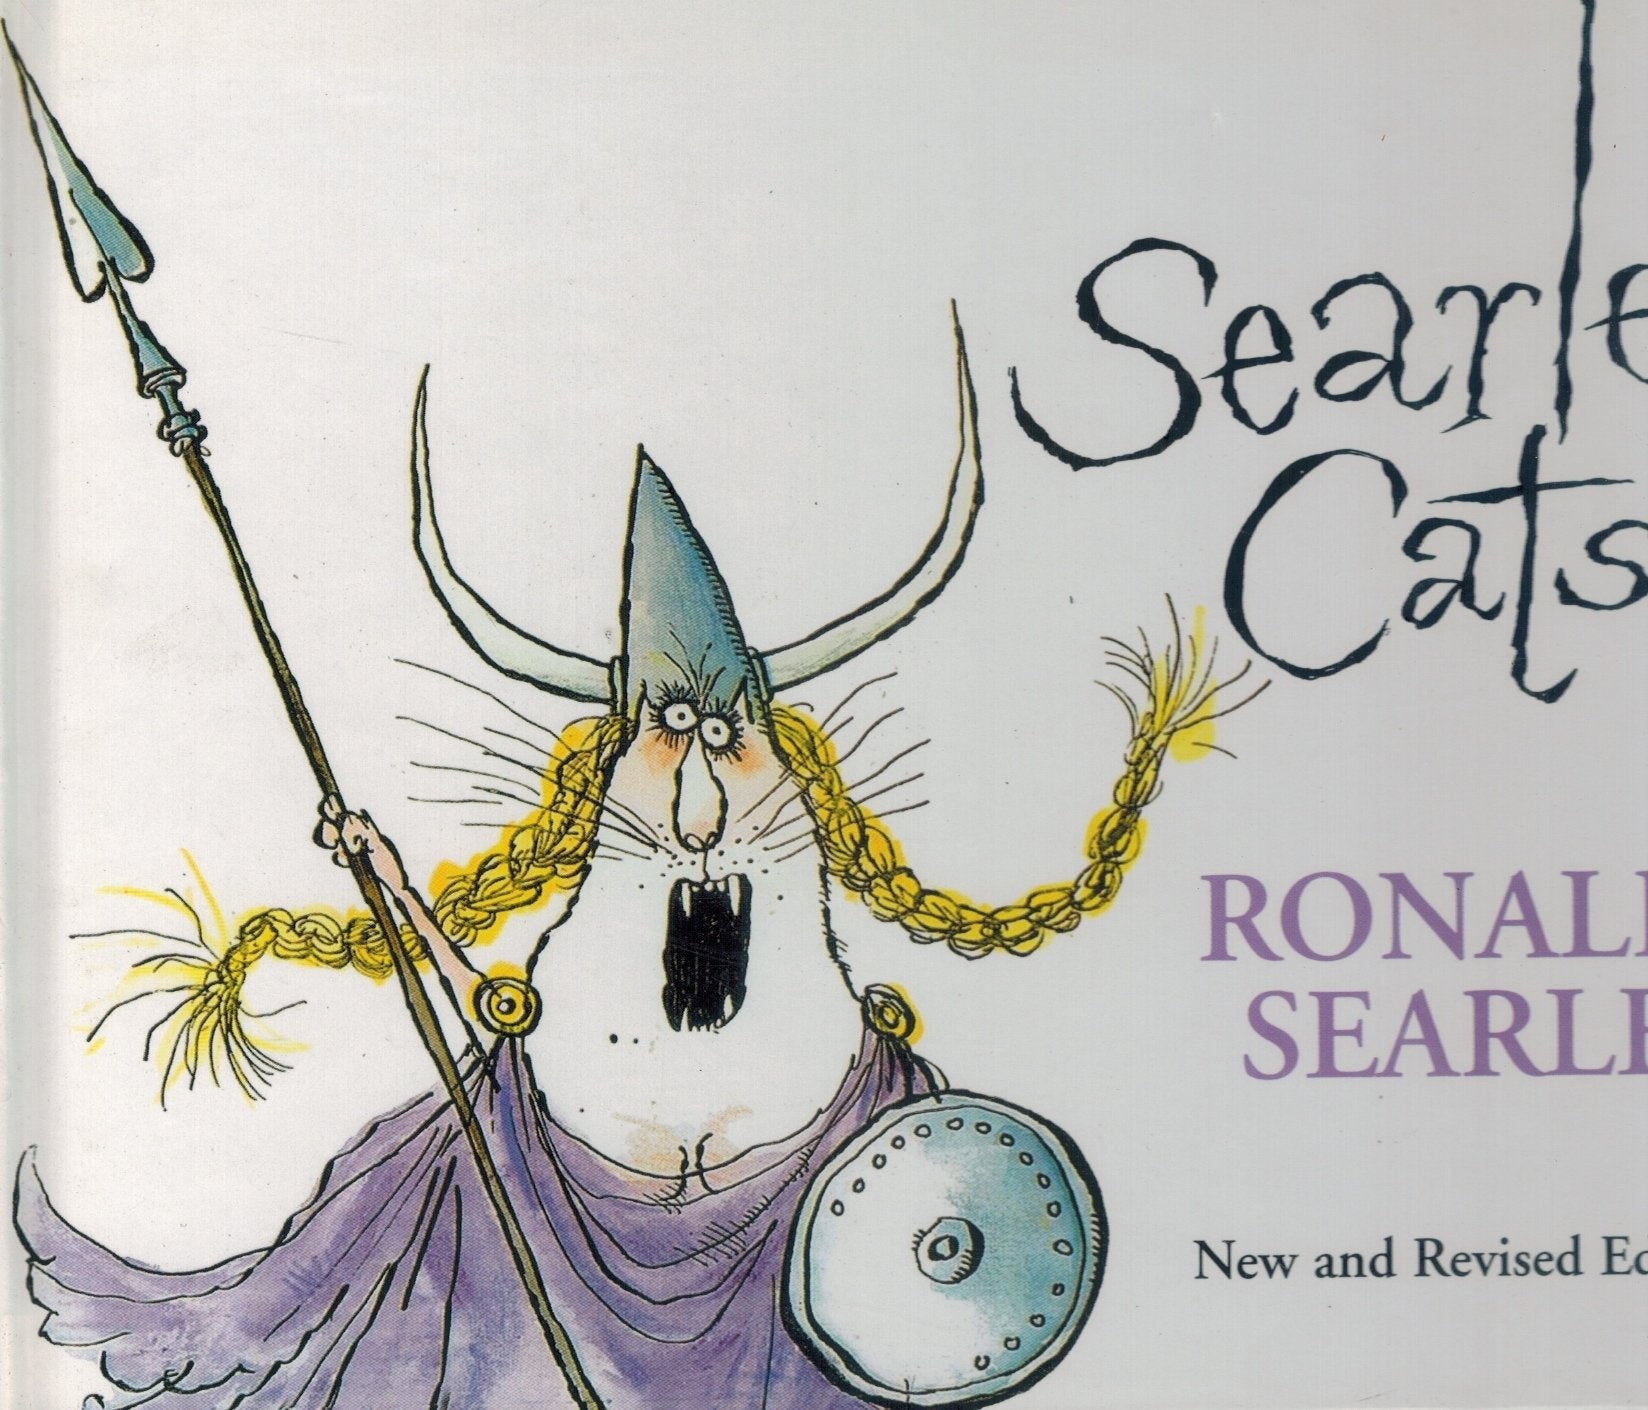 SEARLE'S CATS - books-new